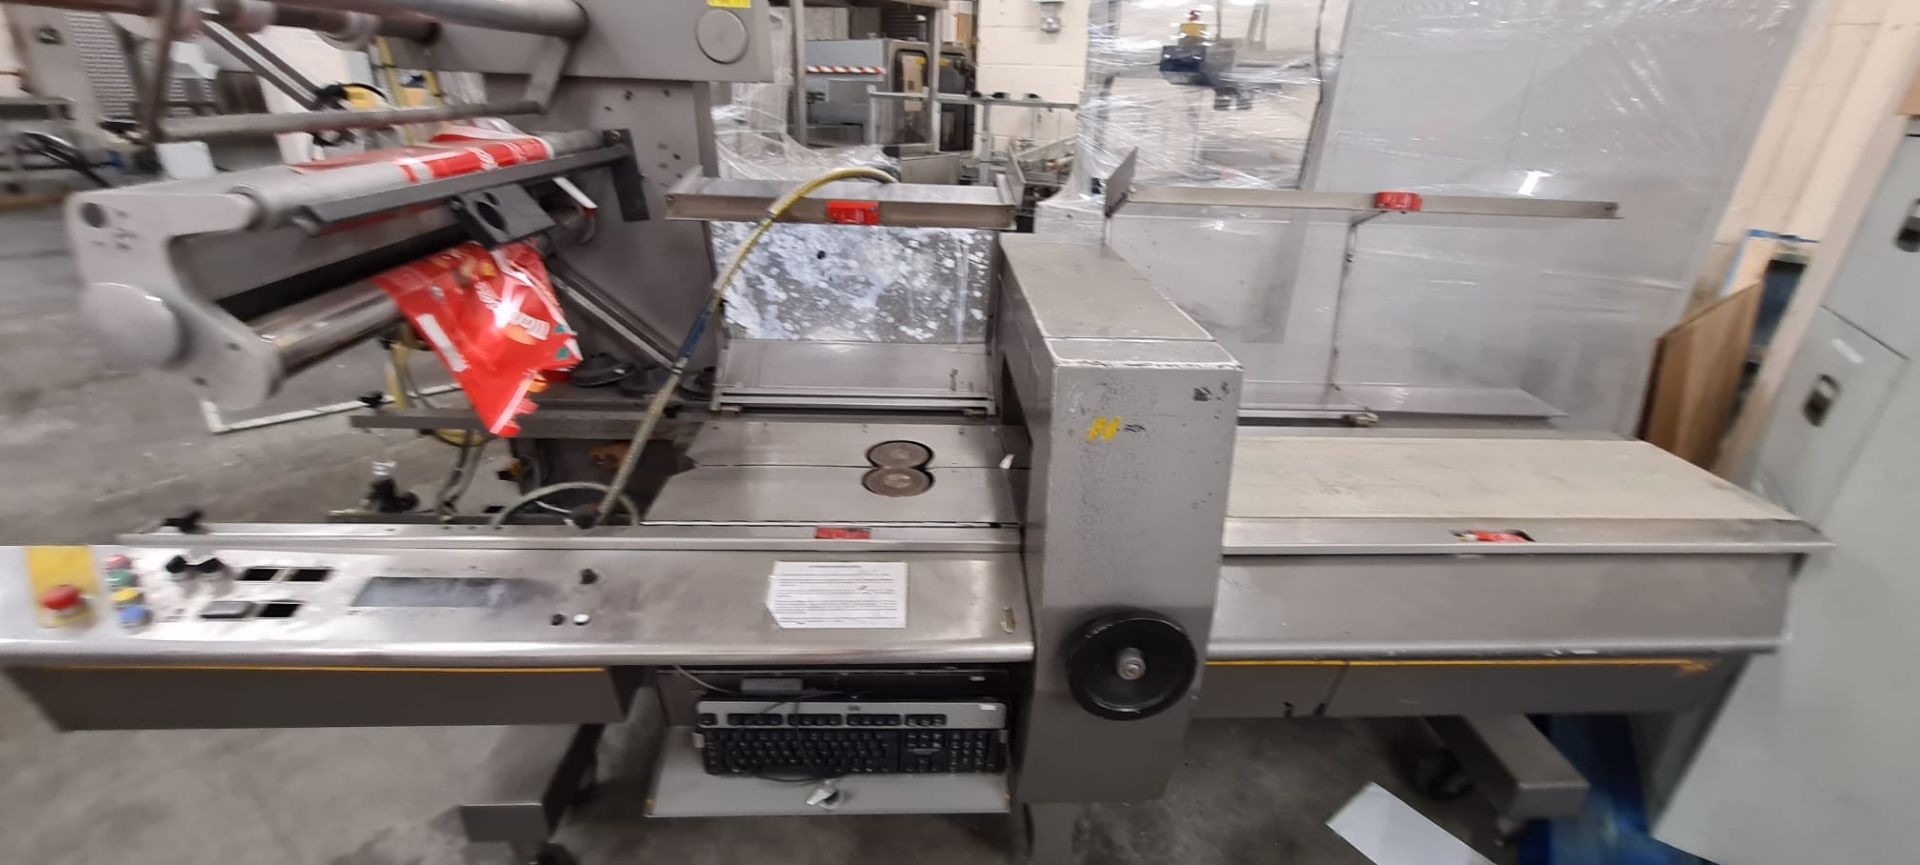 Rose Forgrove Flowpak 605 Flow Wrapper, serial no. 50387, year of manufacture 1996, 415V, 4200l x - Image 2 of 3